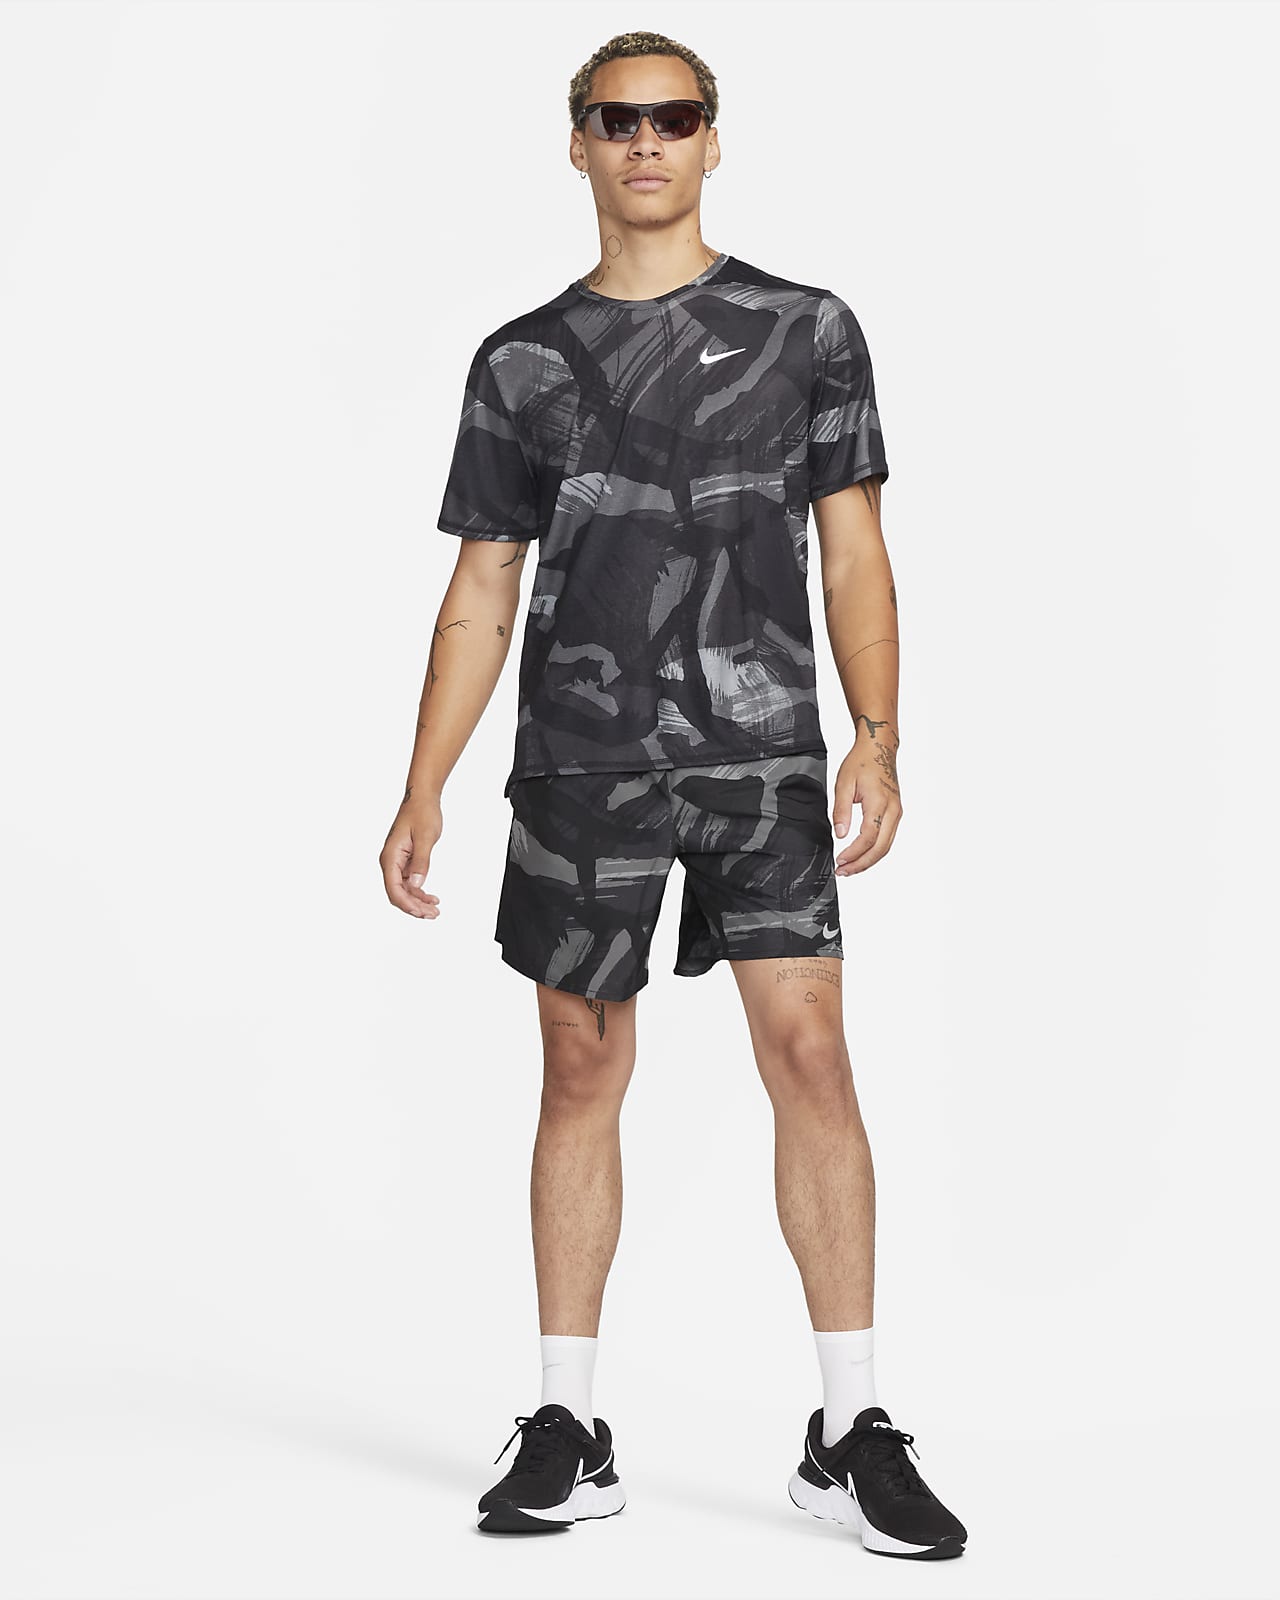 Challenger 7" Brief-Lined Camo Running Shorts. Nike.com